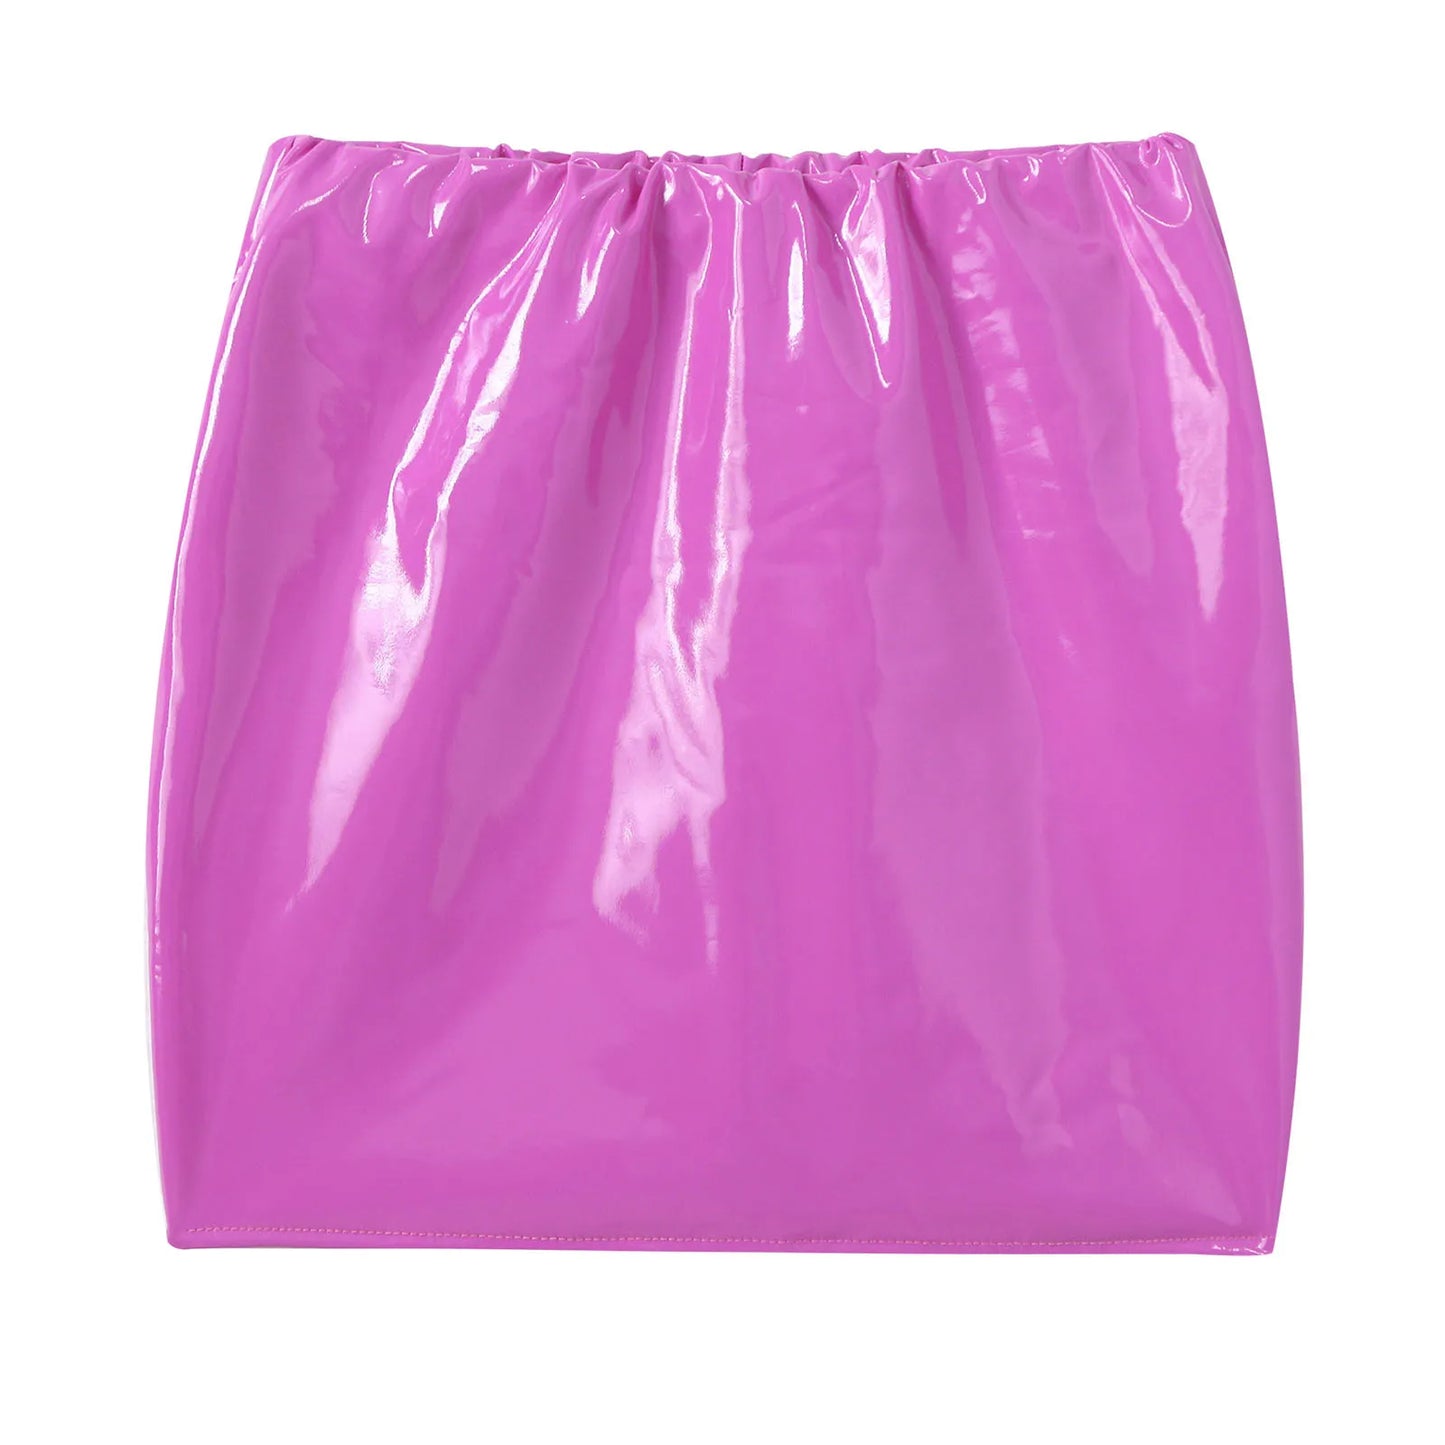 Womens Latex Patent Leather Miniskirt Solid Color Elastic Waistband Glossy Pencil Skirt Night Club Party Music Festival Costume